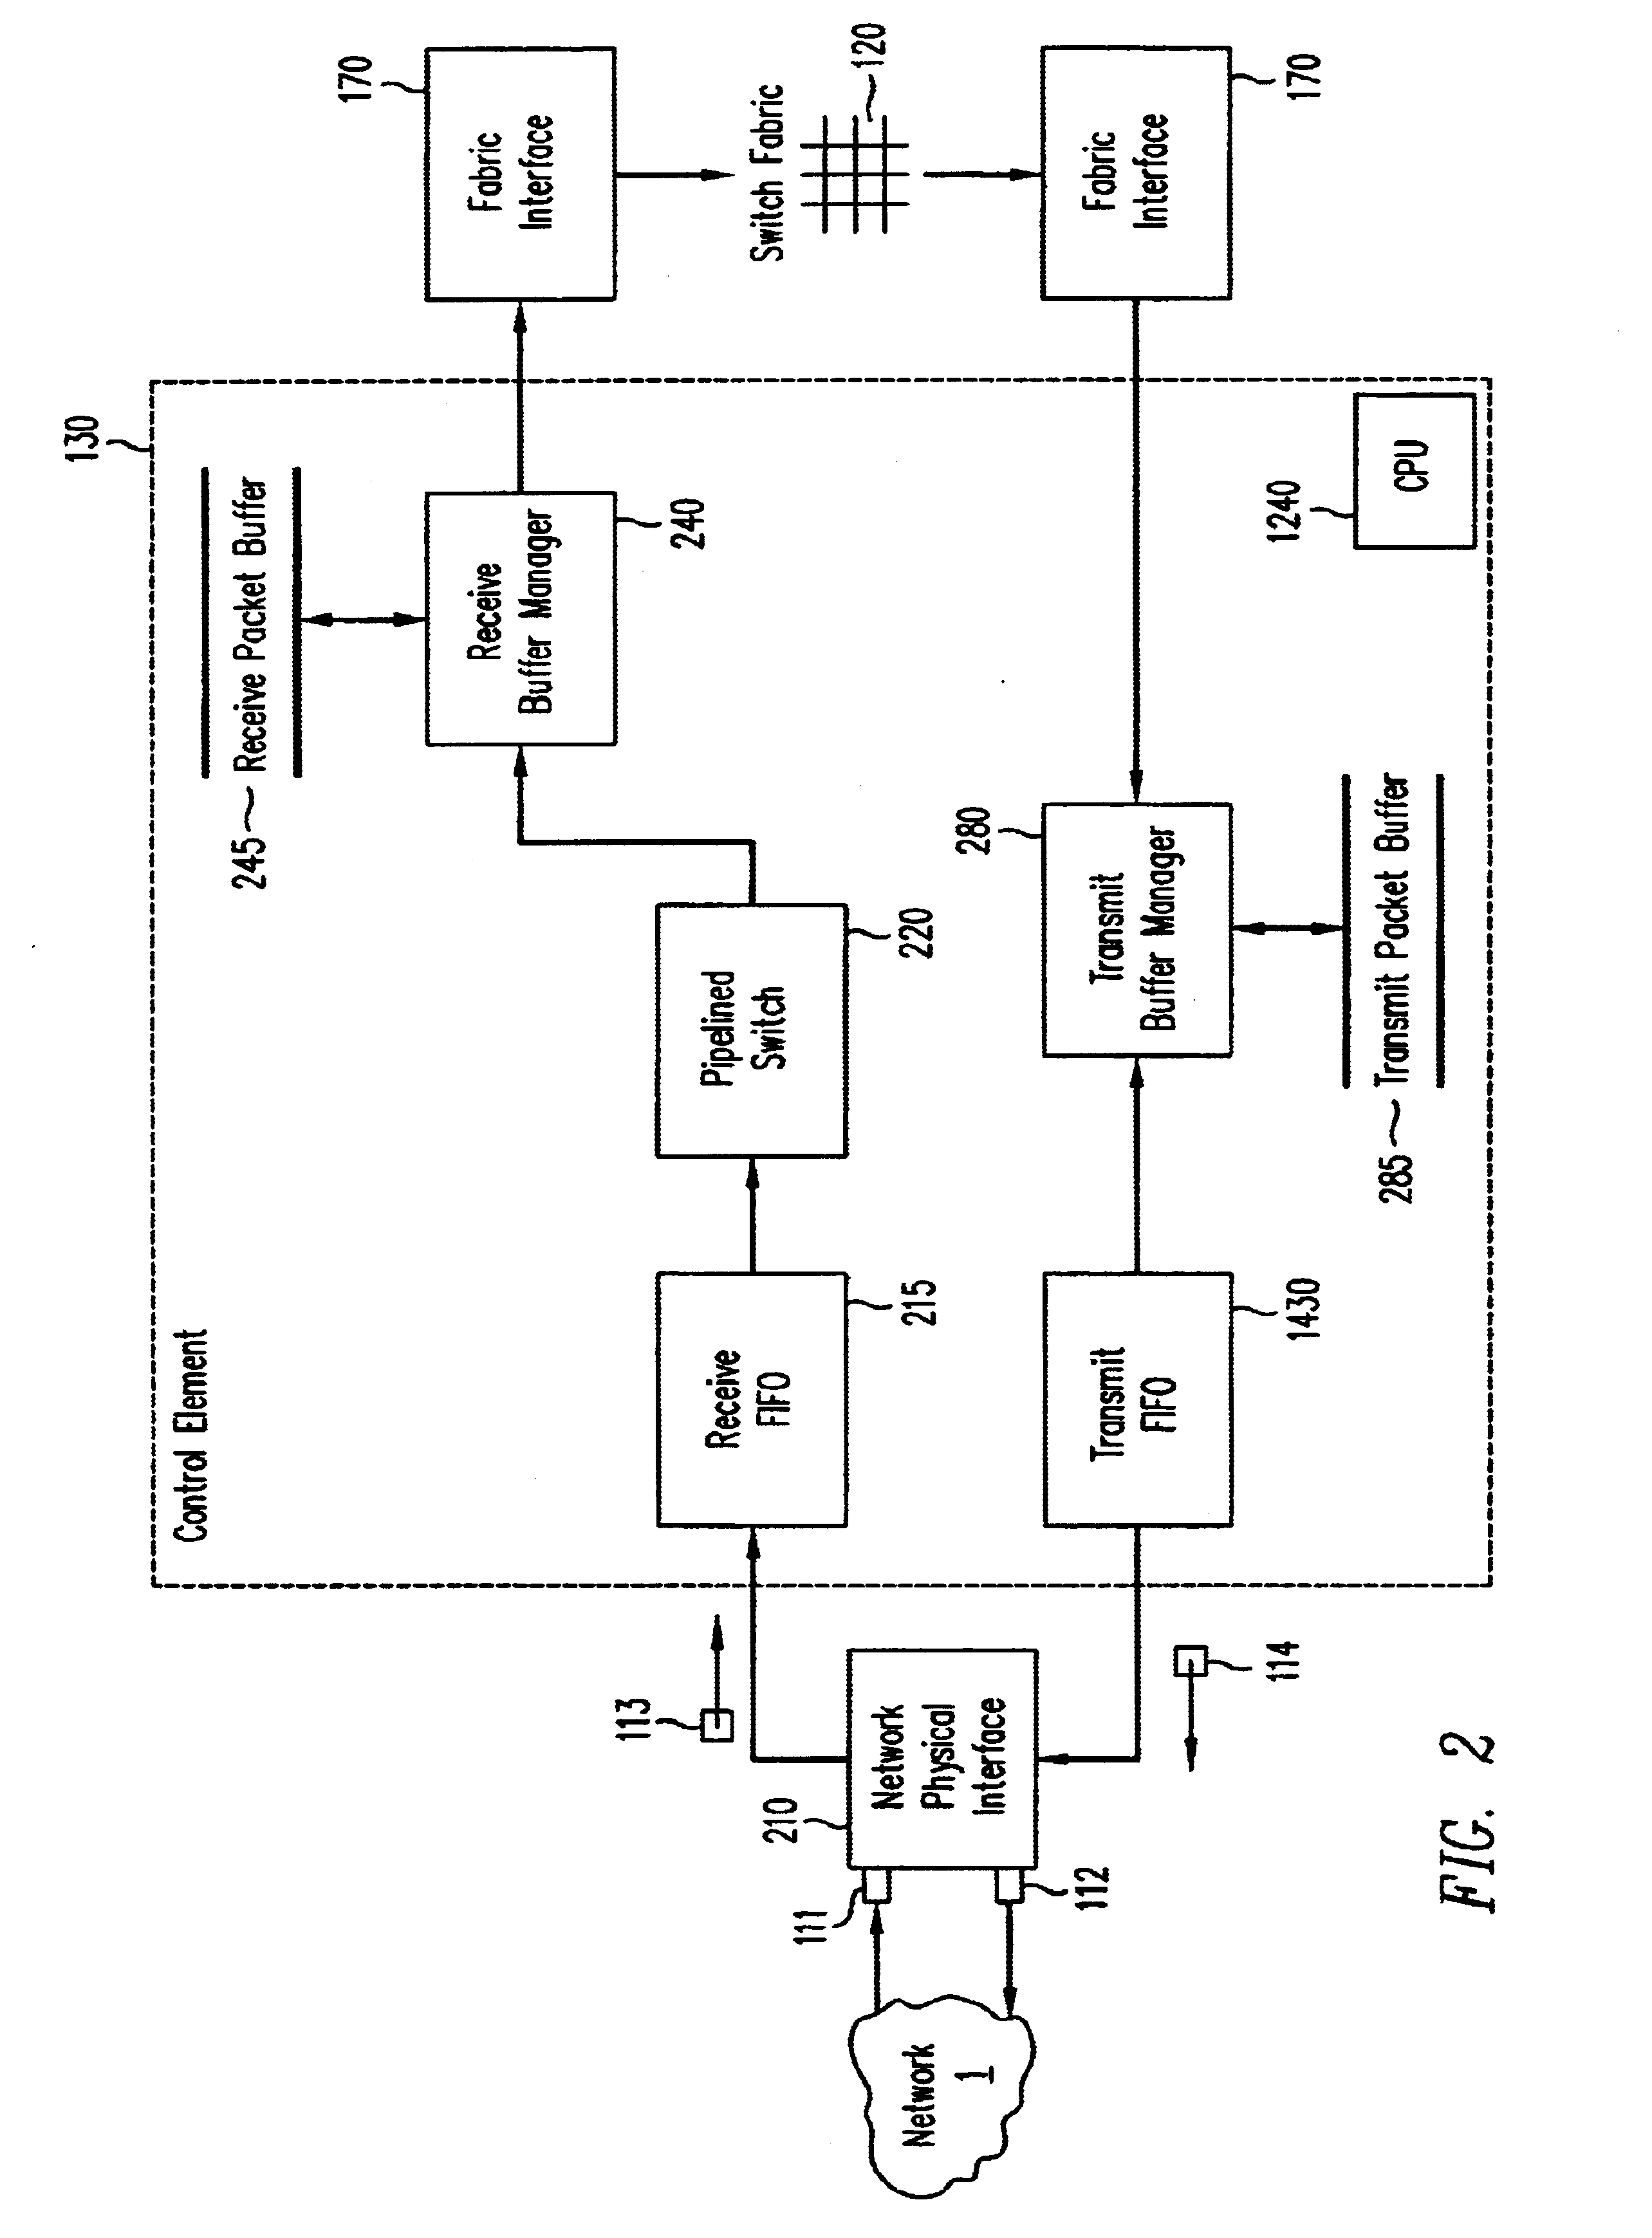 Flexible engine and data structure for packet header processing